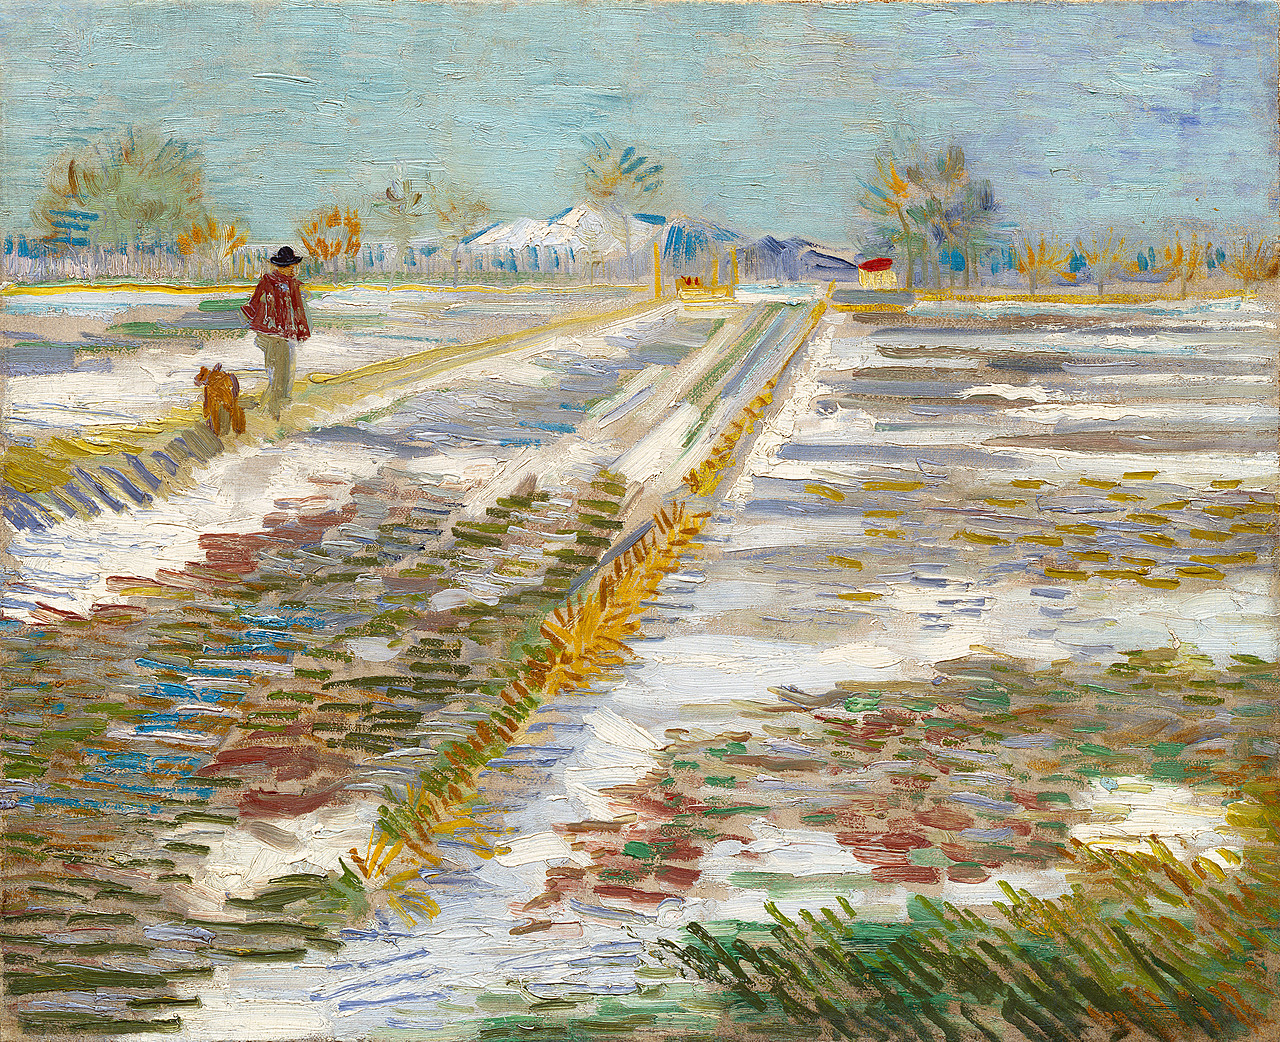 Paul Allen Auction Results: Van Gogh Painting Sets $117 Million Record  Bloomberg